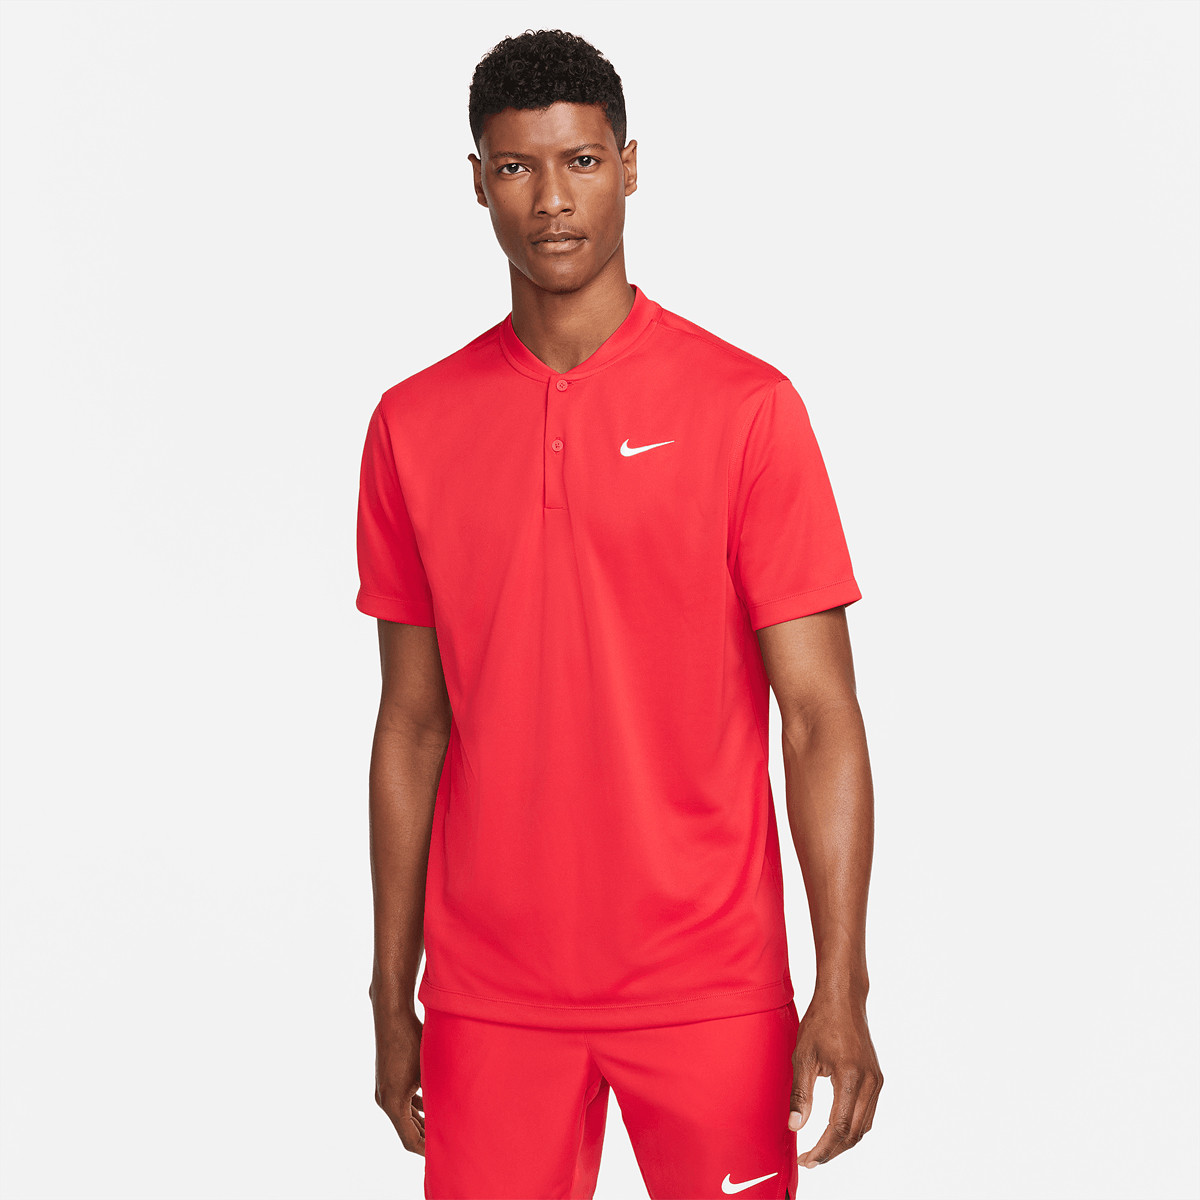 POLO NIKE COURT DRI FIT BLADE SOLID VICTORY